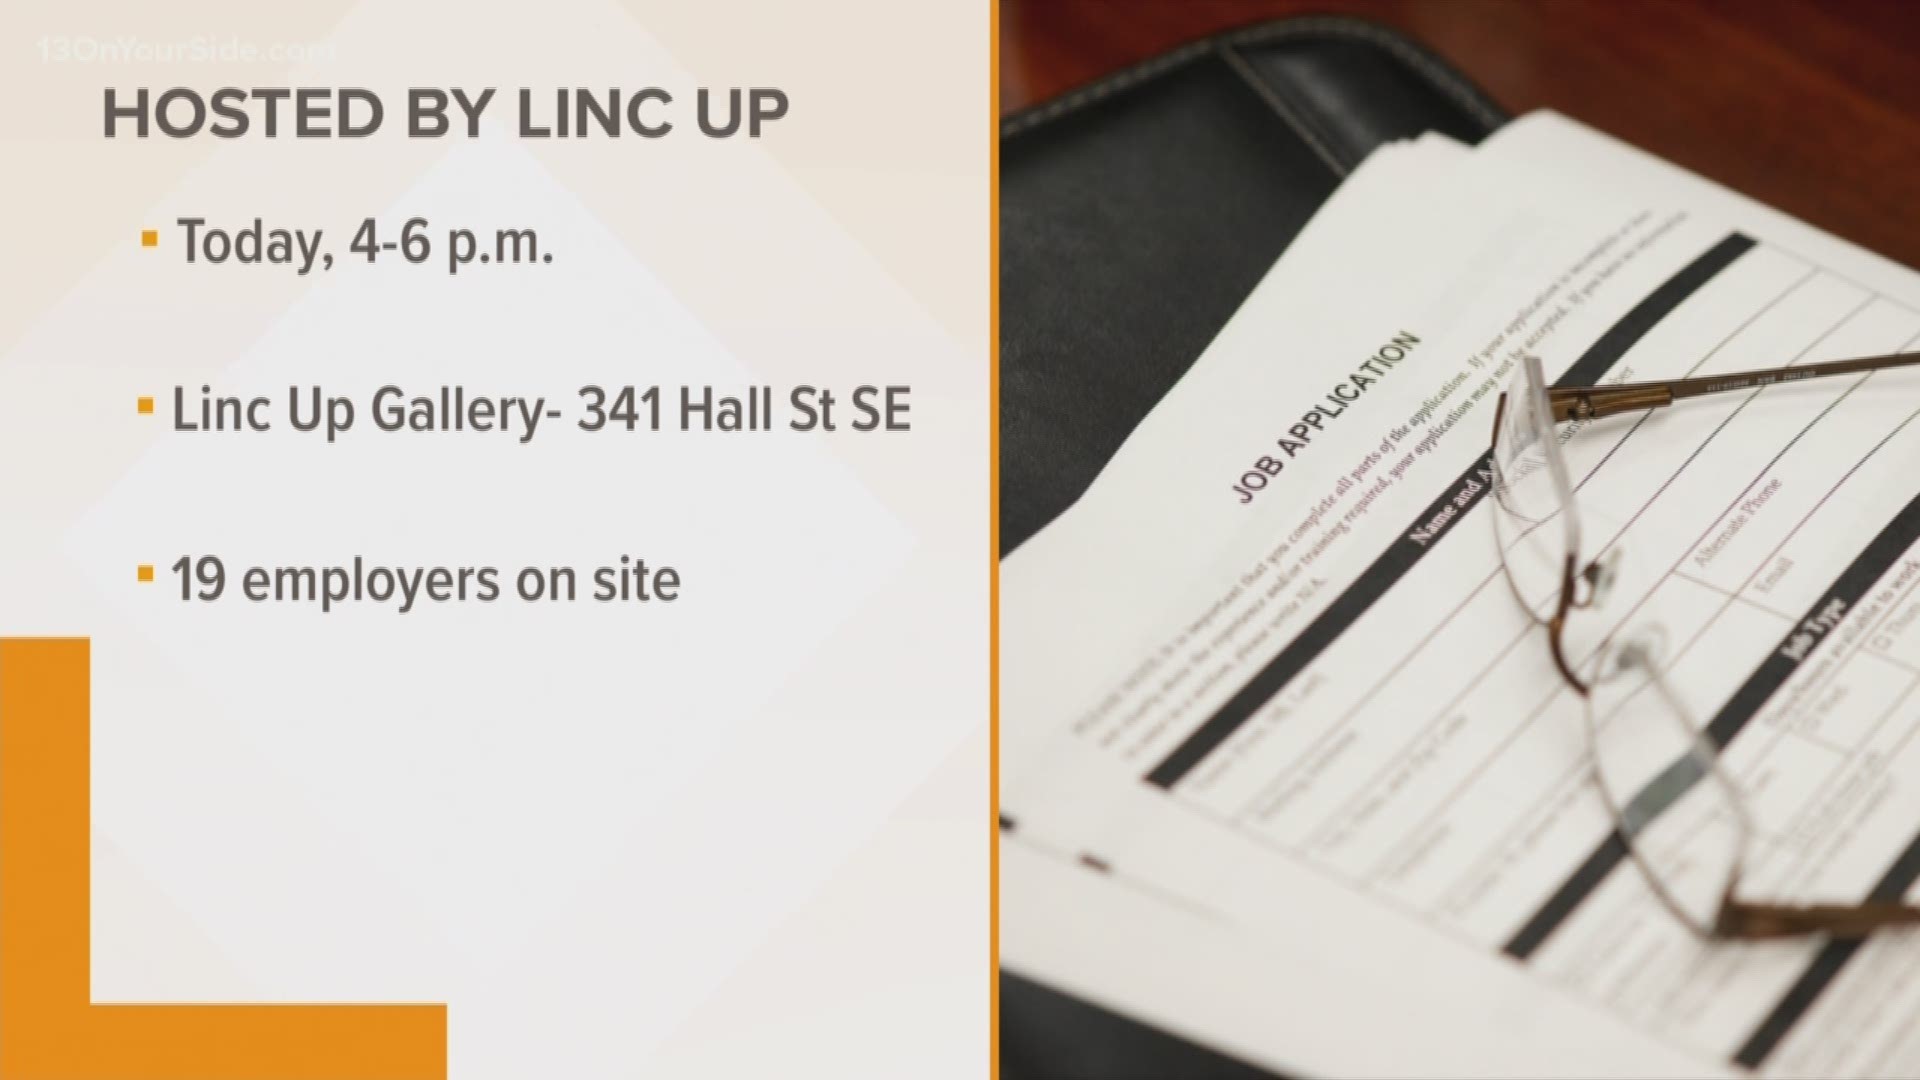 LINC Up is hosting its 2nd Pop Up Job Shop event of this year on Thursday, June 20. Nineteen employers will be at the event ready to either interview or hire on the spot.